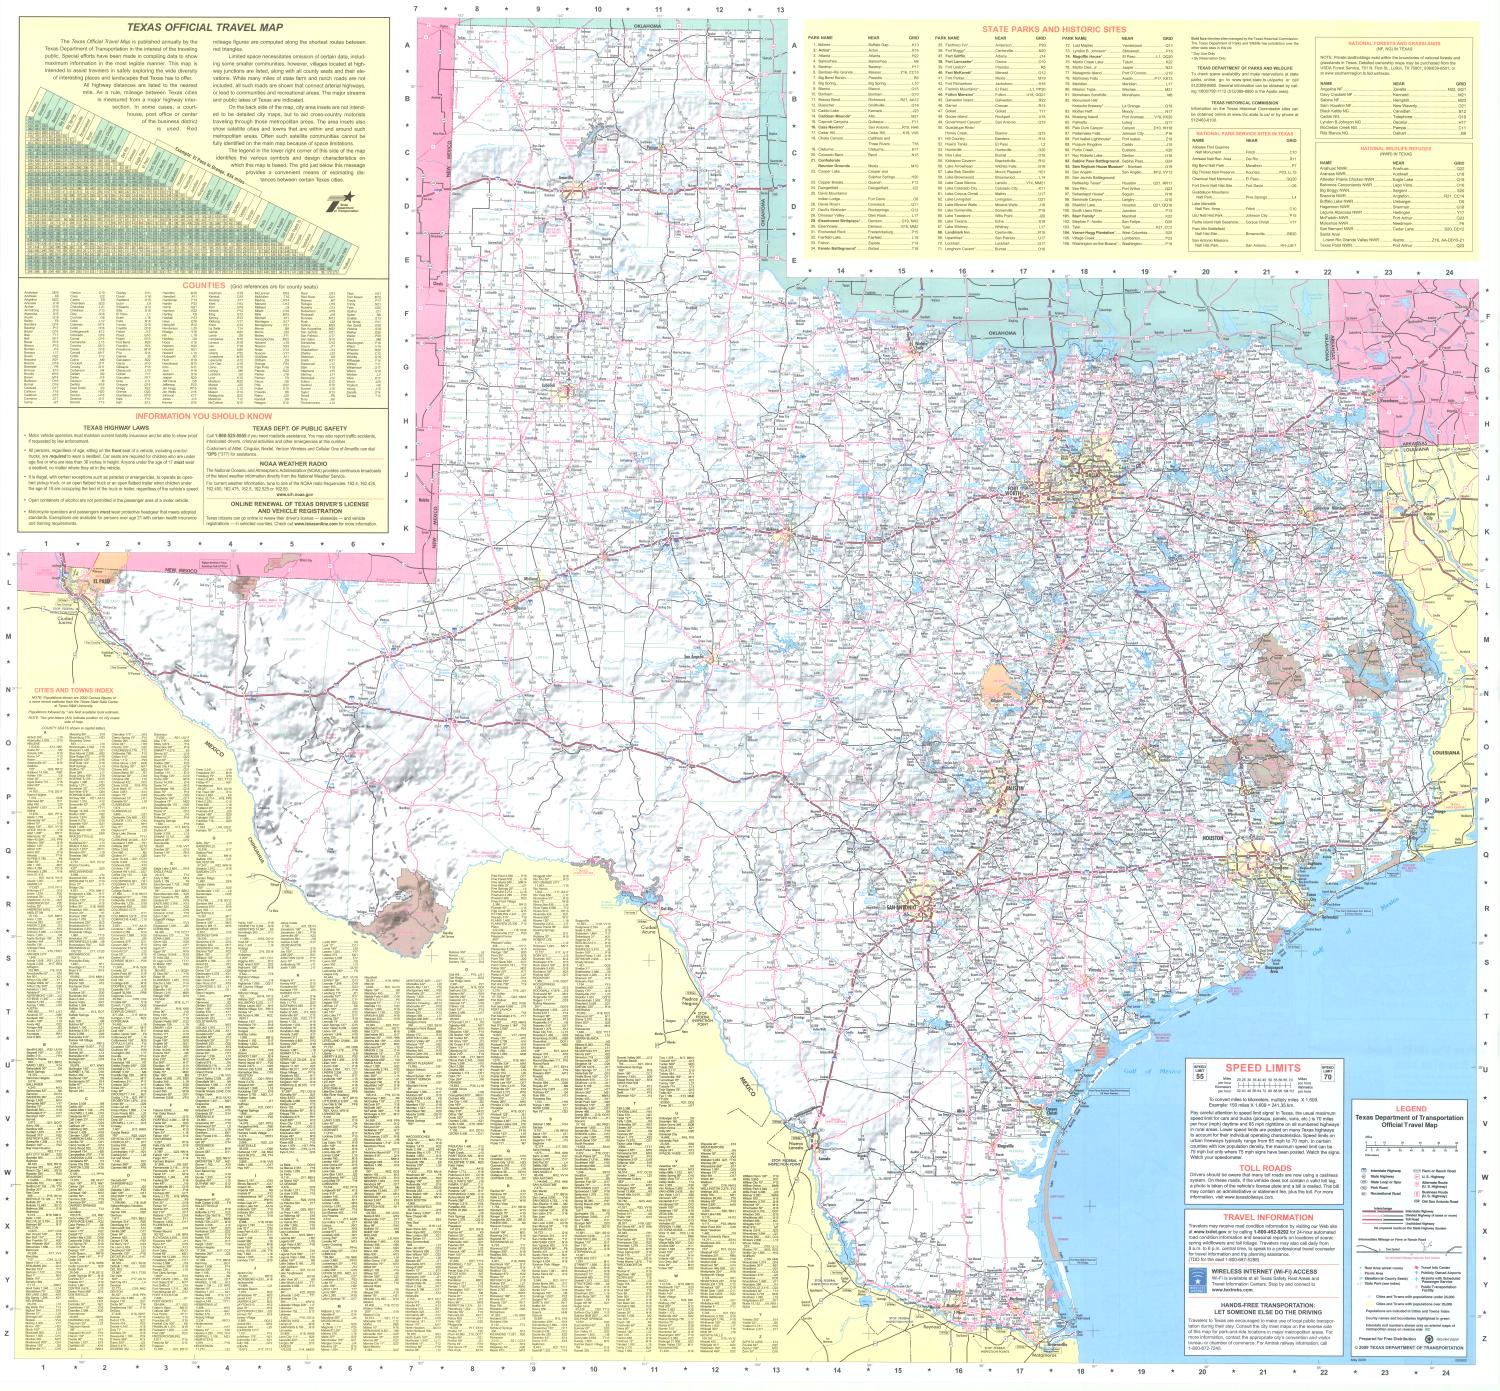 Texas Official Travel Map - Side 1 of 2 - The Portal to Texas History